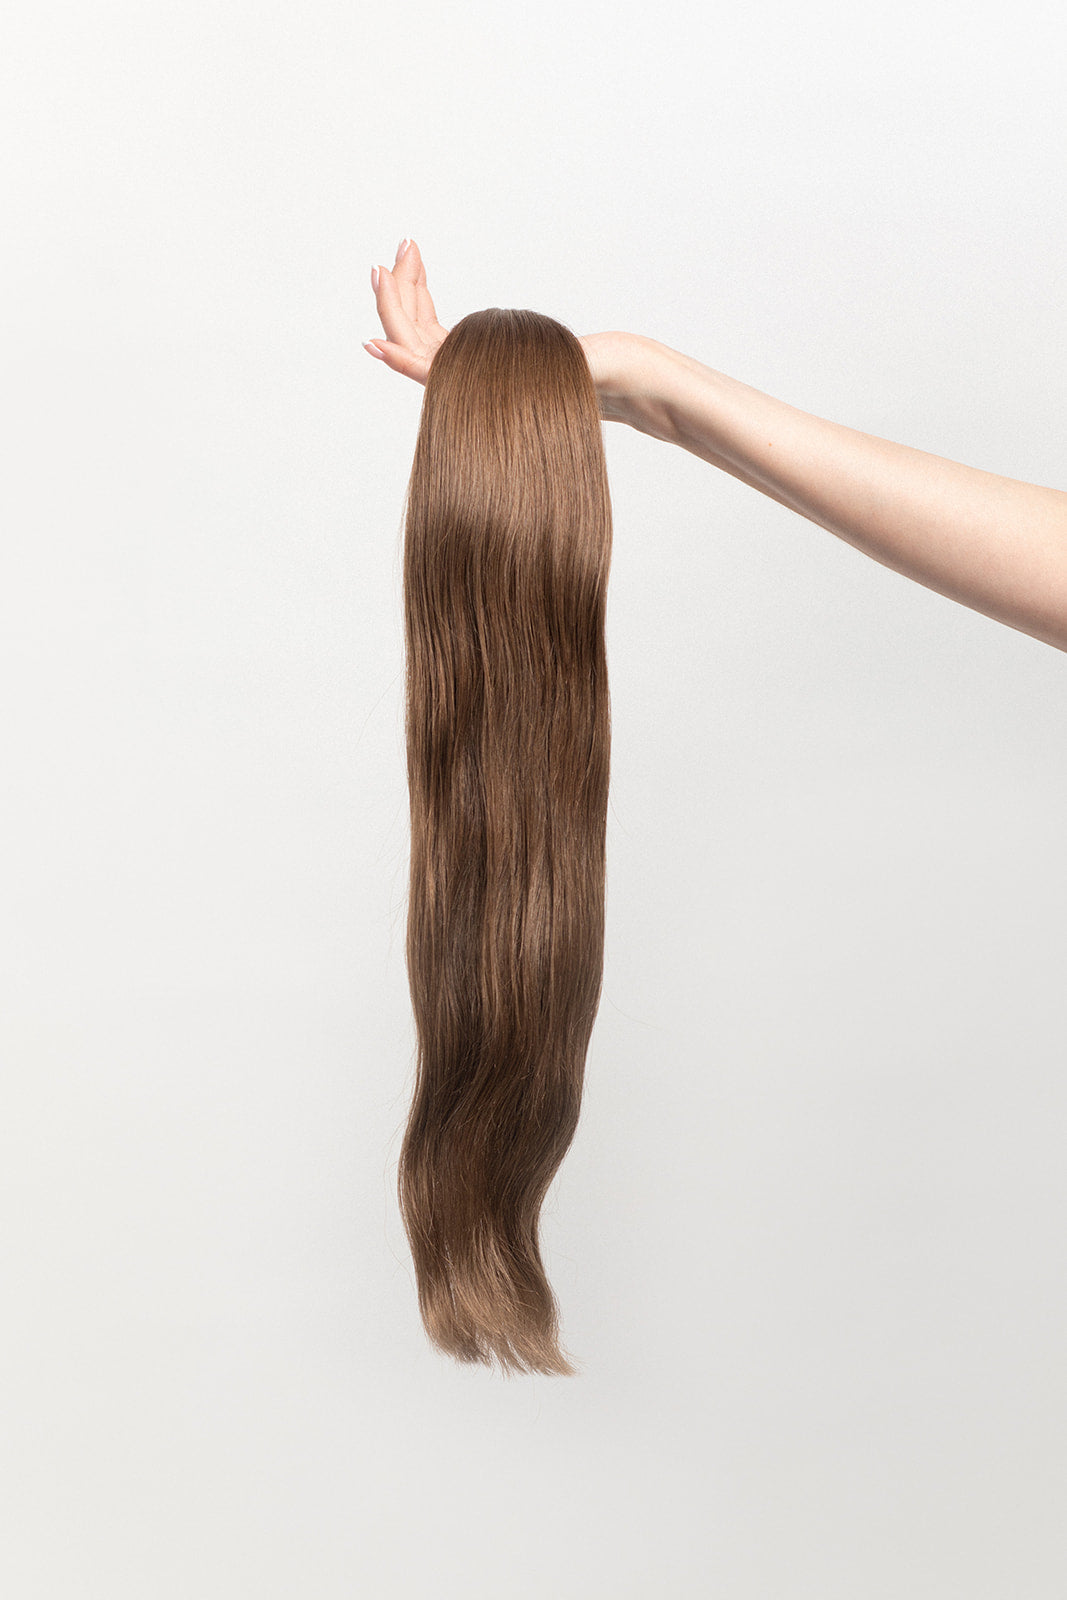 Walnut is our light brown, with cool yet rich undertones. Stylist lingo: Natural level 7 The Harloc Ponytail Extension is our clip-in ponytail that is made from ethically sourced, Remy Slavic hair. It is a quick way to instantly add length and volume to your ponytail and it comes in two lengths, 18-20” and 20-24”. It comes with a velcro base and clip to secure the ponytail. Available in 10 of our beautiful shades.